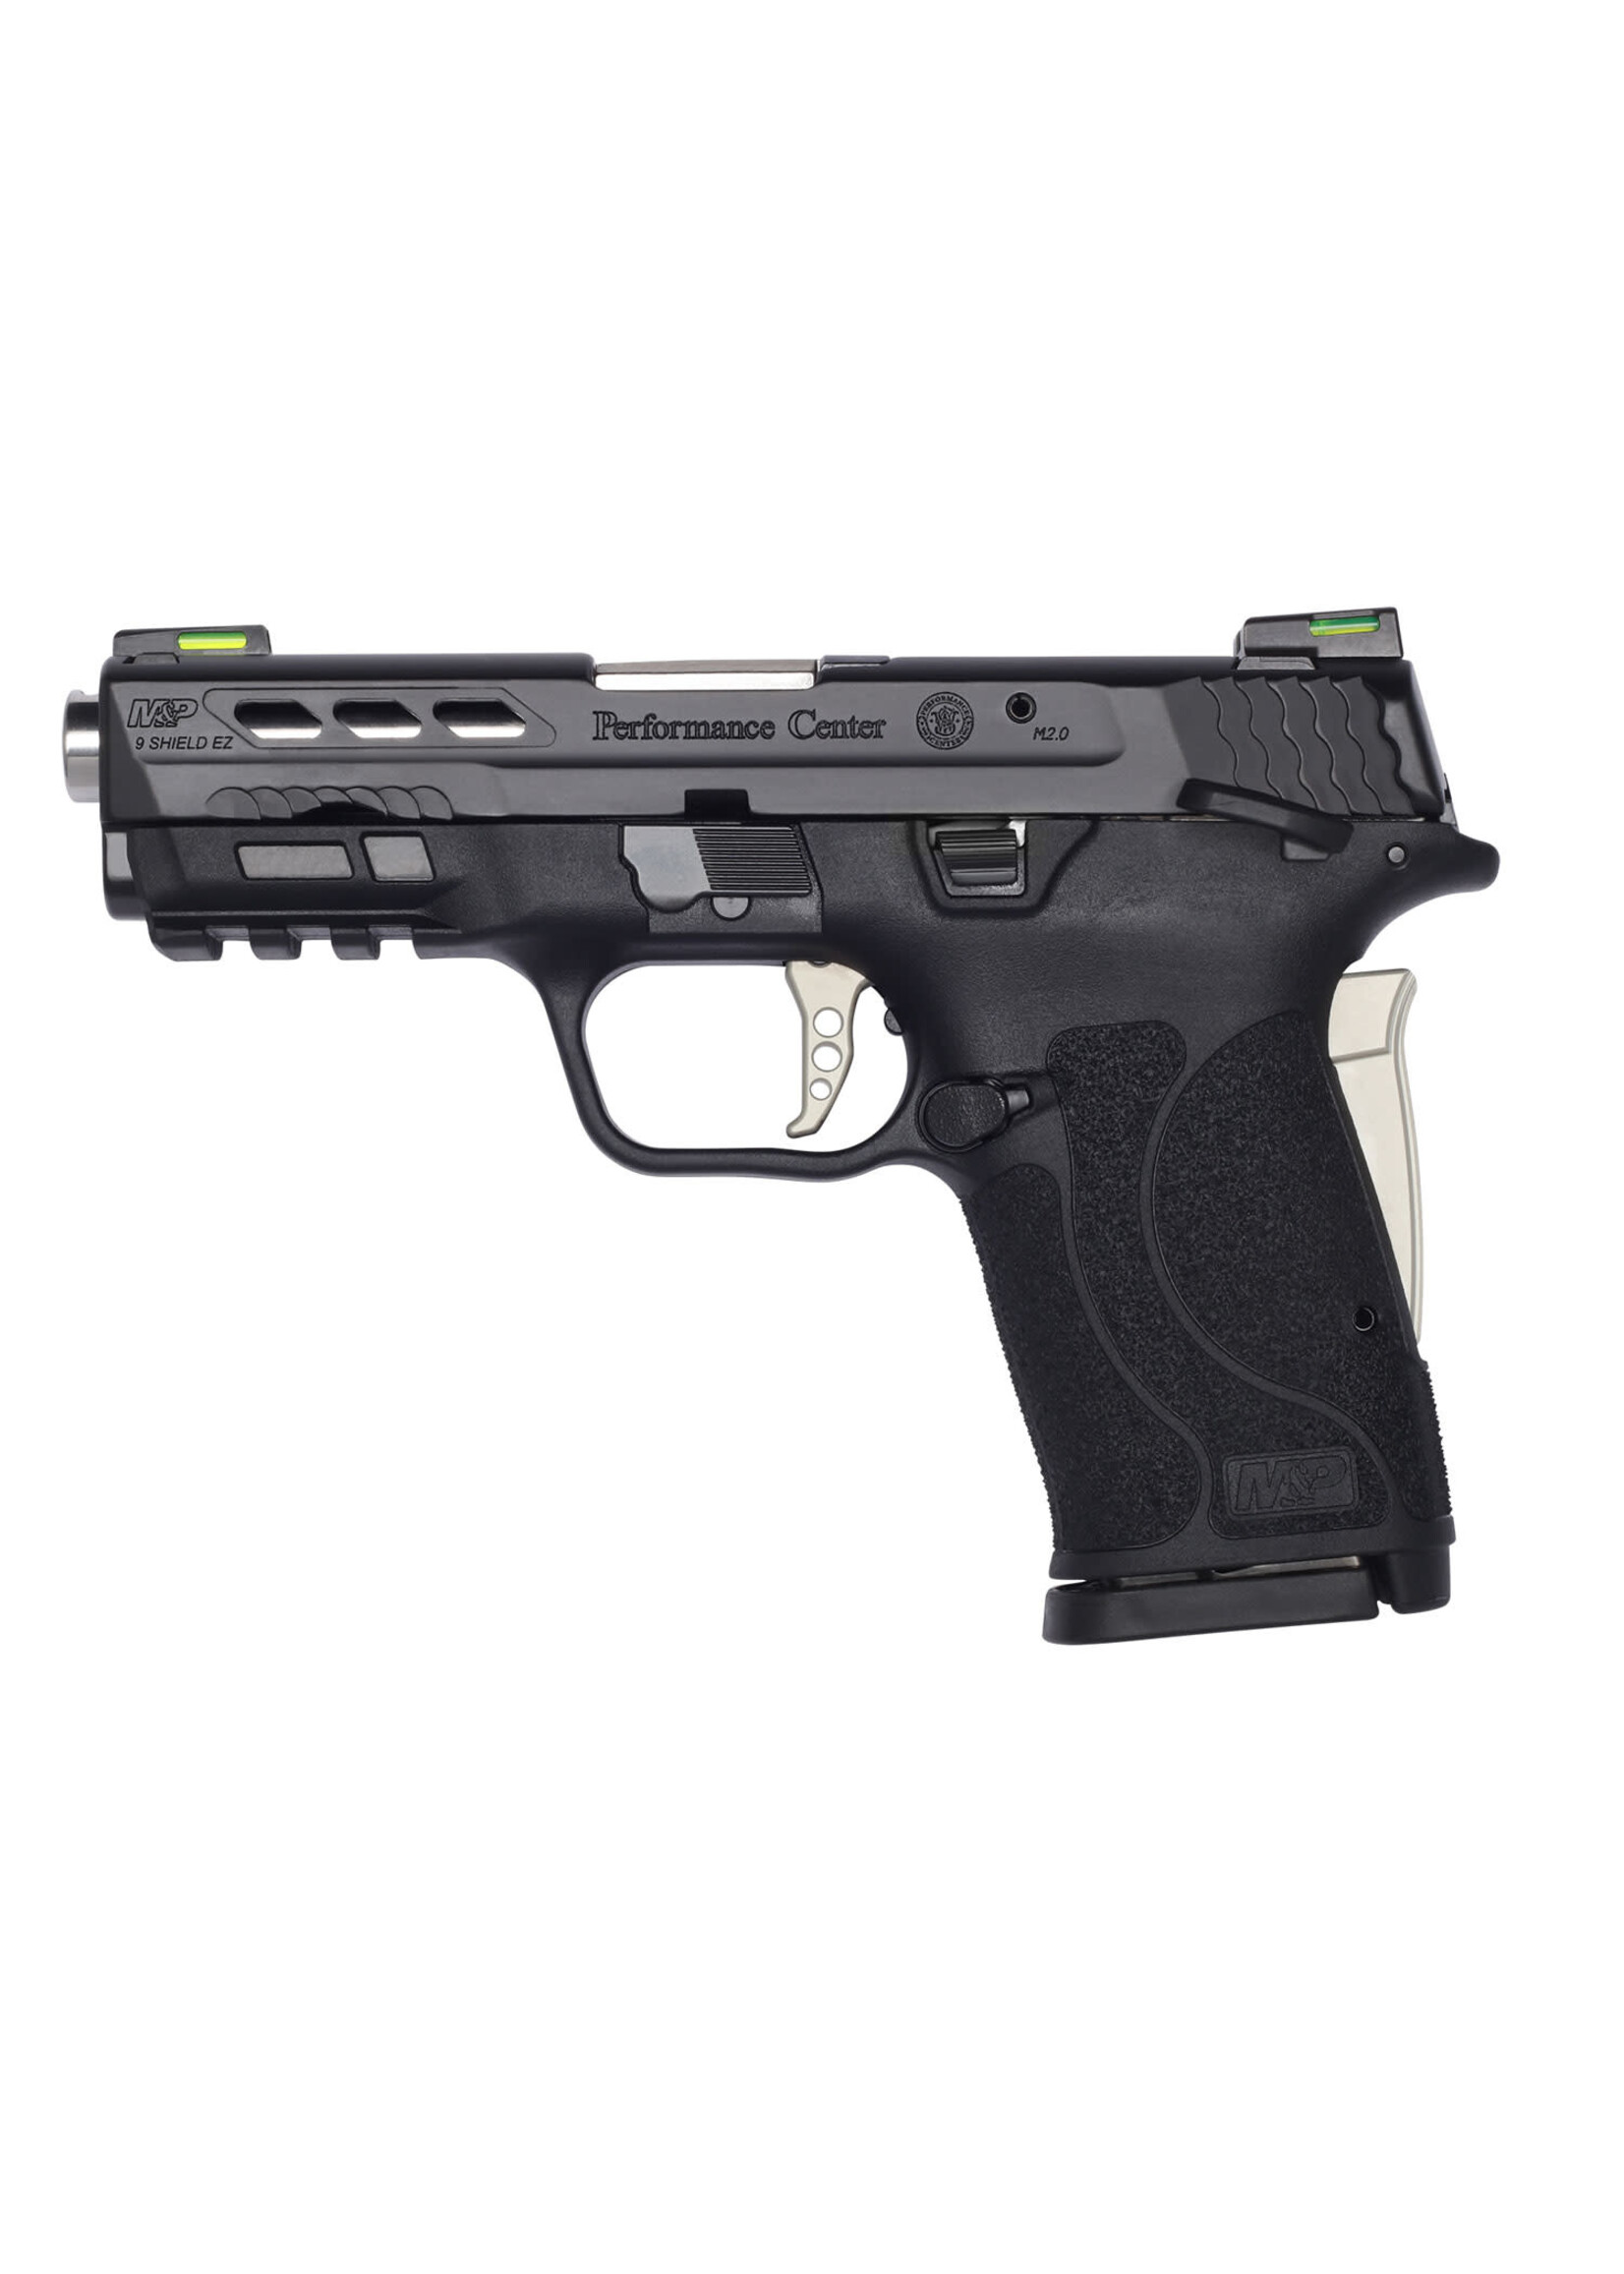 Smith and Wesson (S&W) Smith & Wesson 13225 M&P Performance Center Shield EZ M2.0 9mm Luger 3.80" Ported Barrel 8+1 Black Polymer Frame With Picatinny Acc. Rail, Lightening Cut Armornite Slide, Silver Accents, HiViz Litewave H3 Sights, Manual Safety